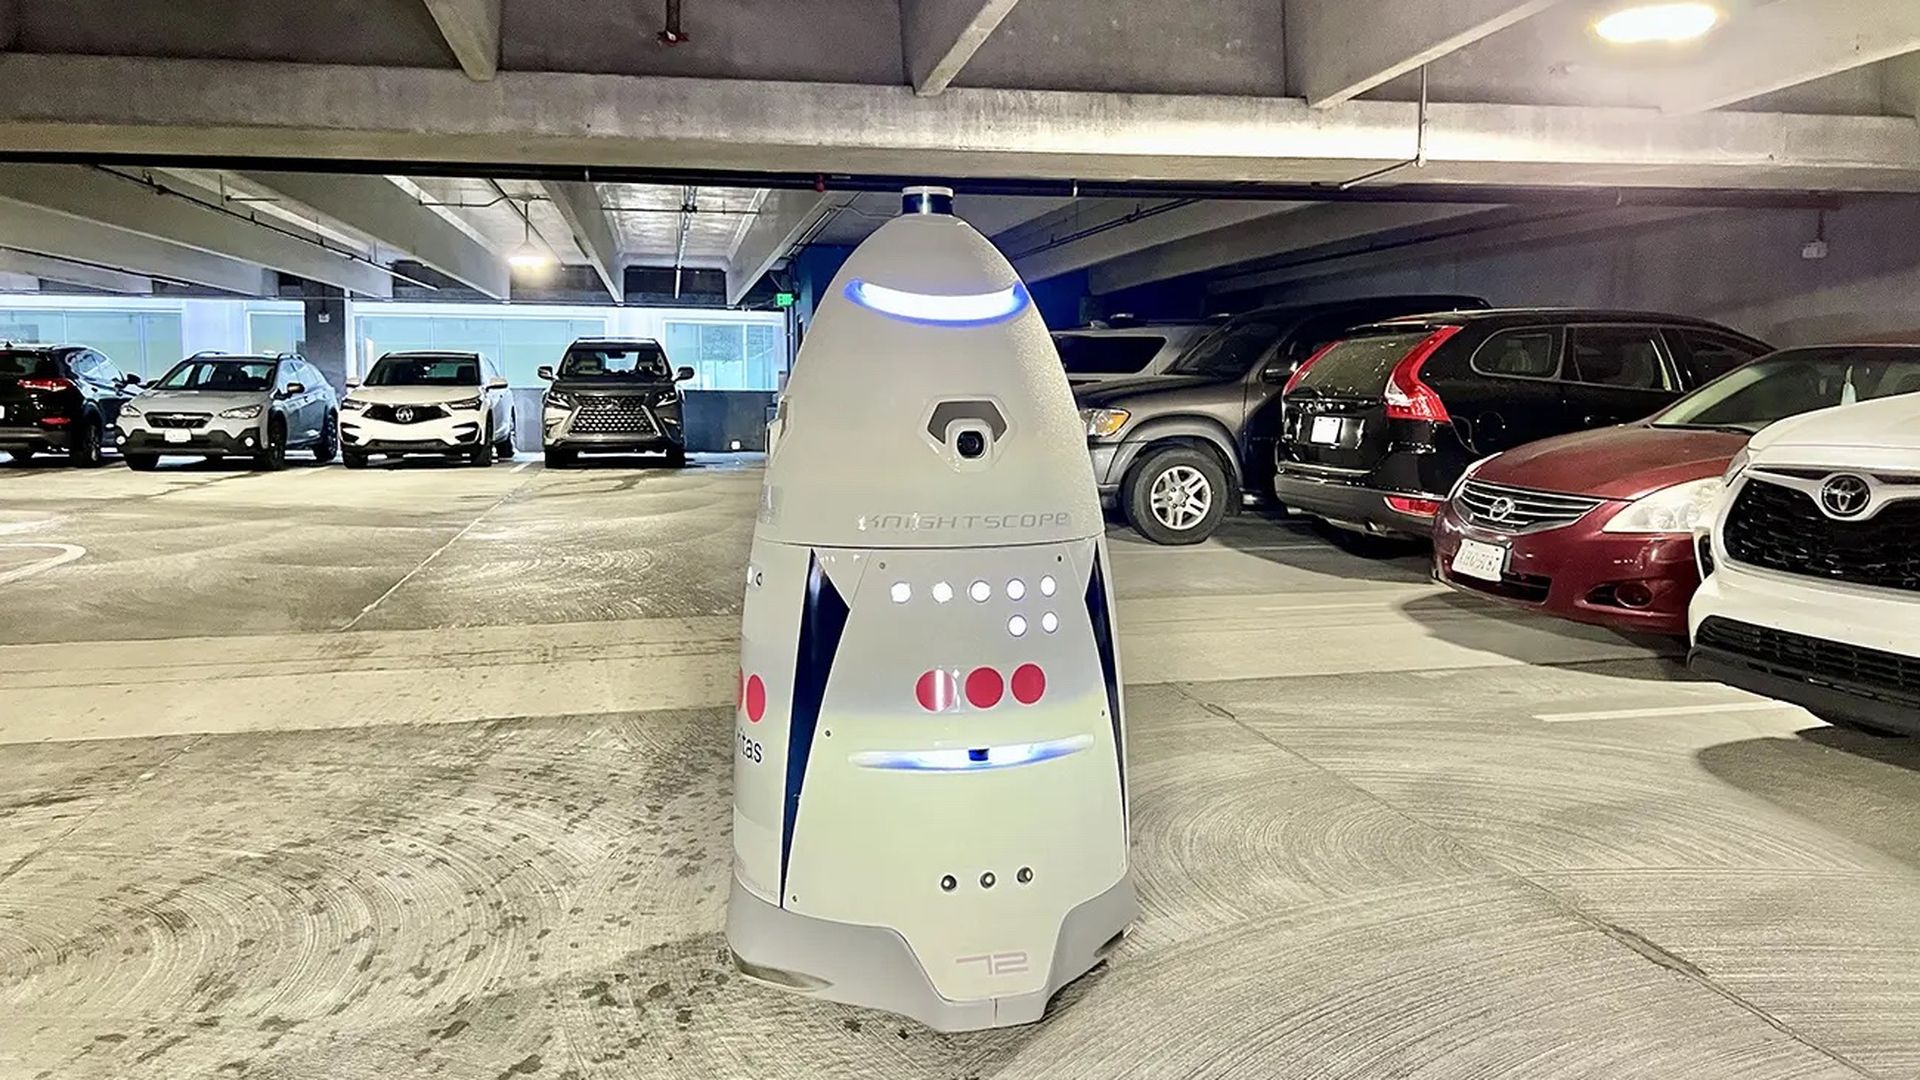 A security robot patrols a garage in Charlotte, N.C.